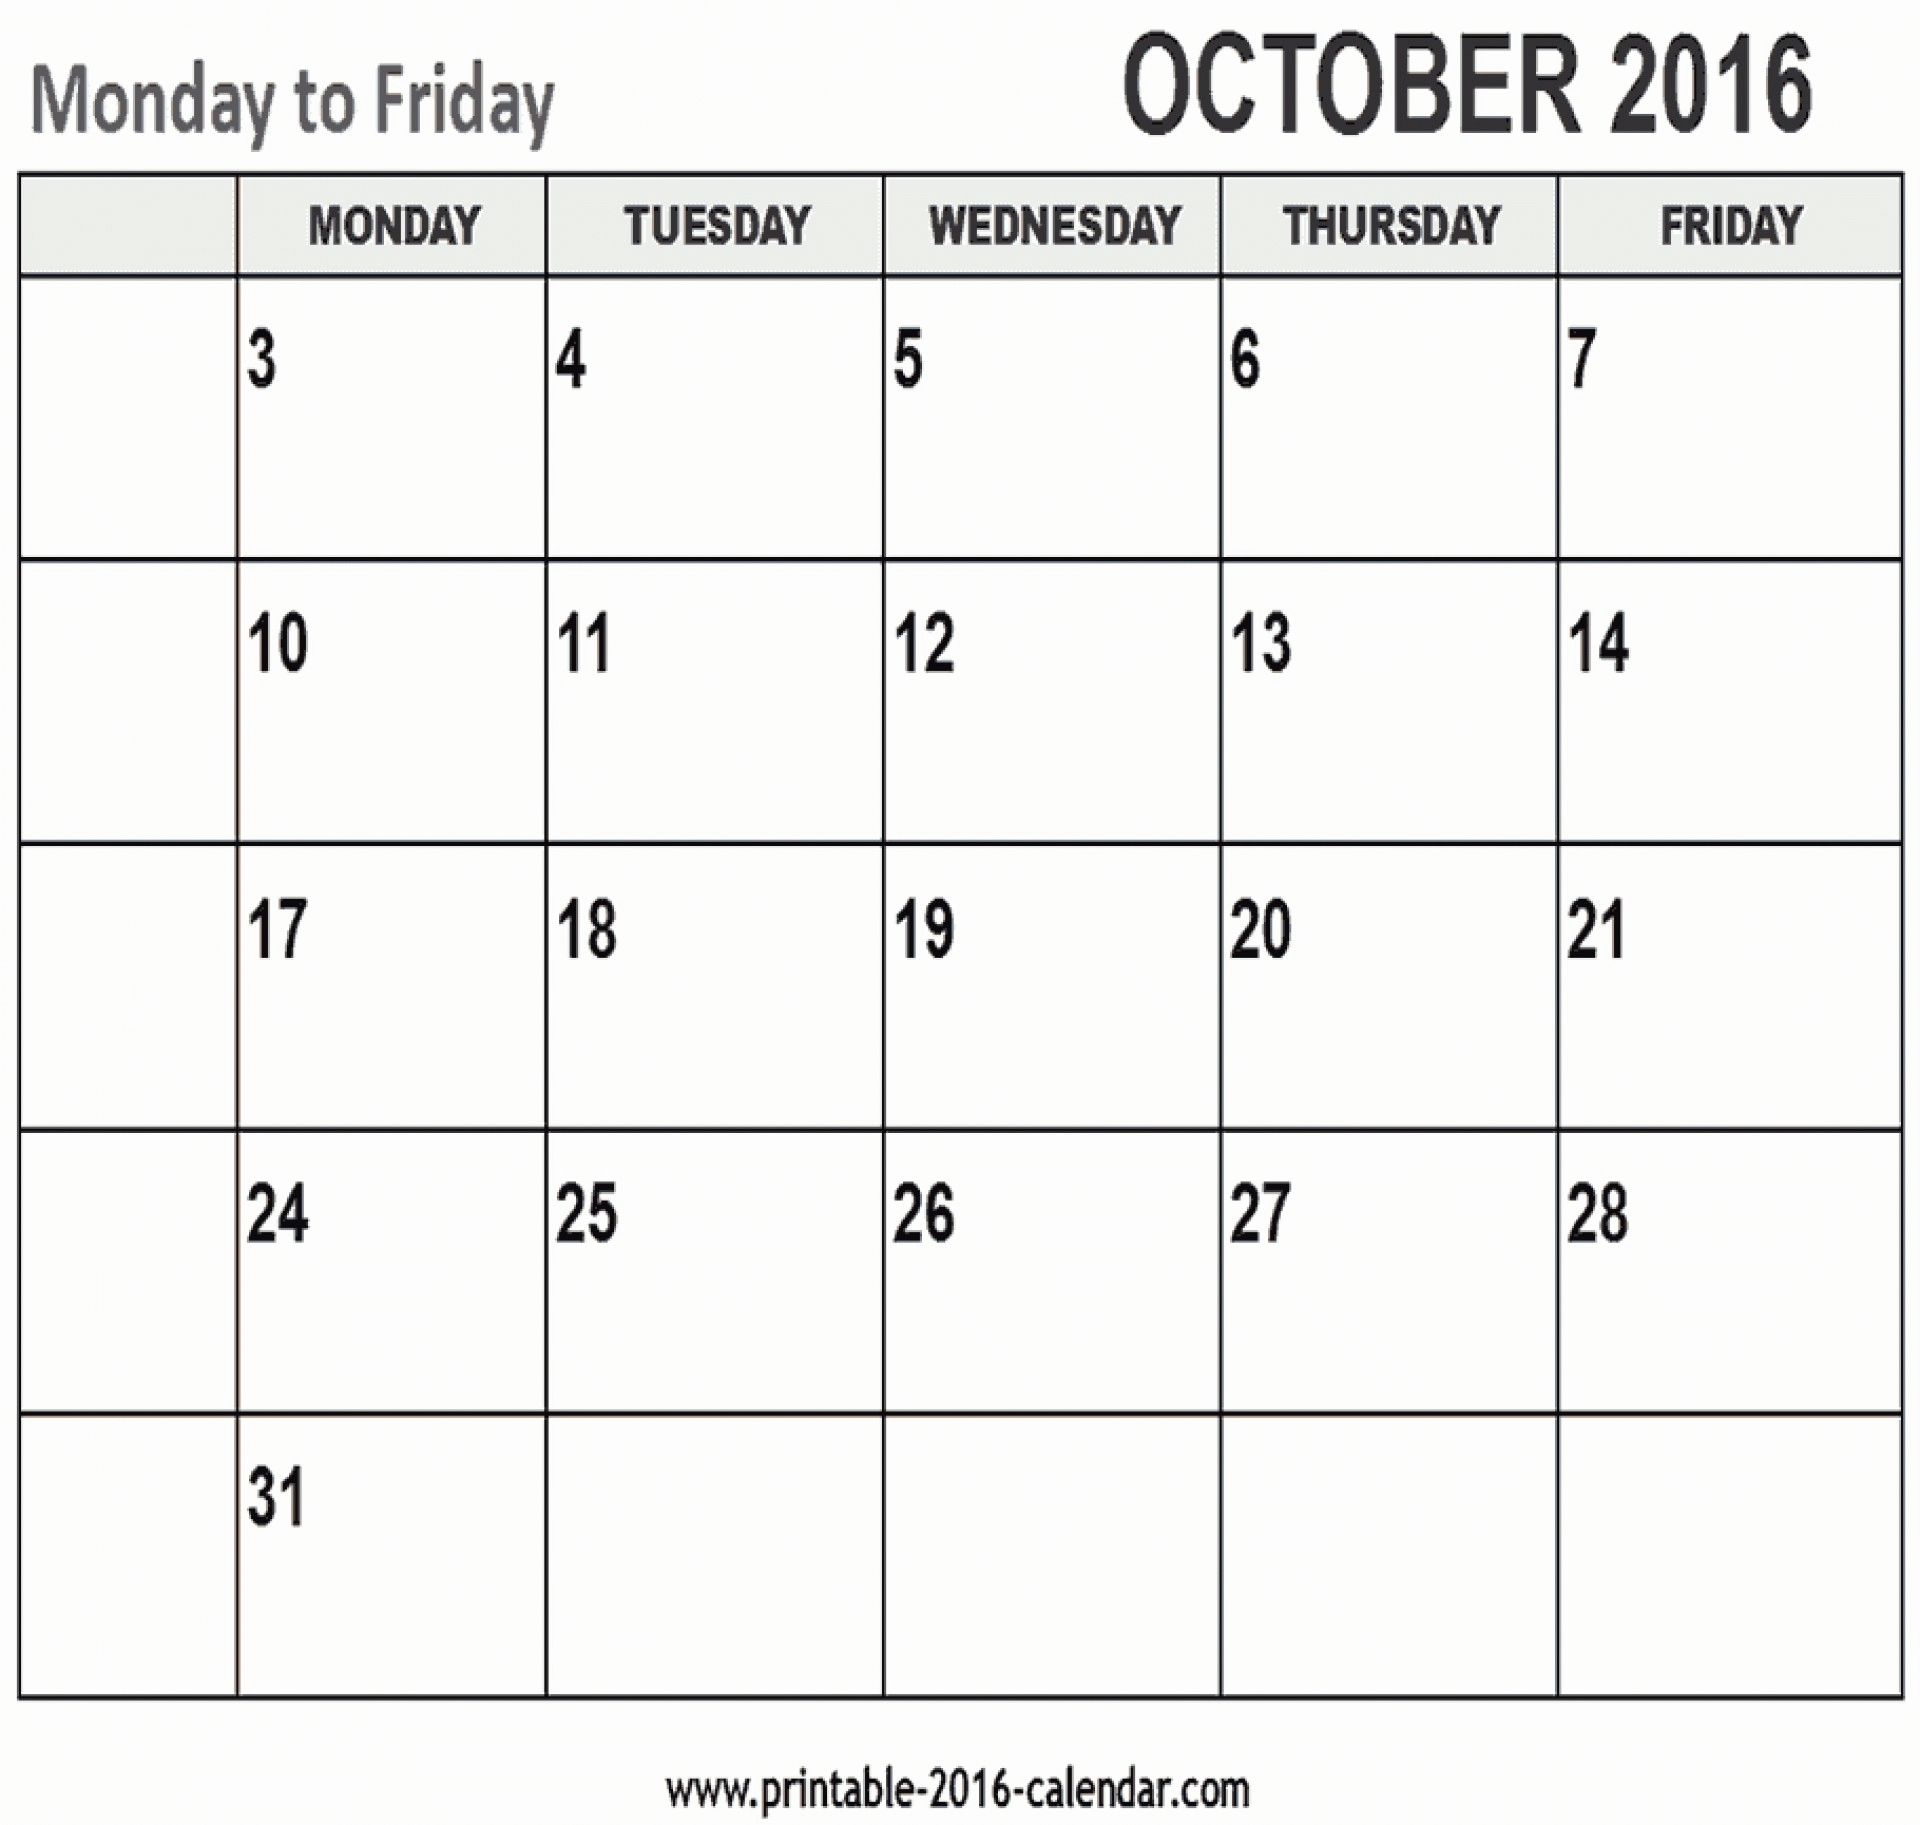 021 Printable Calendar Template Ideas Incredible 2016 May Remarkable Free Printable Calendars Without Weekends